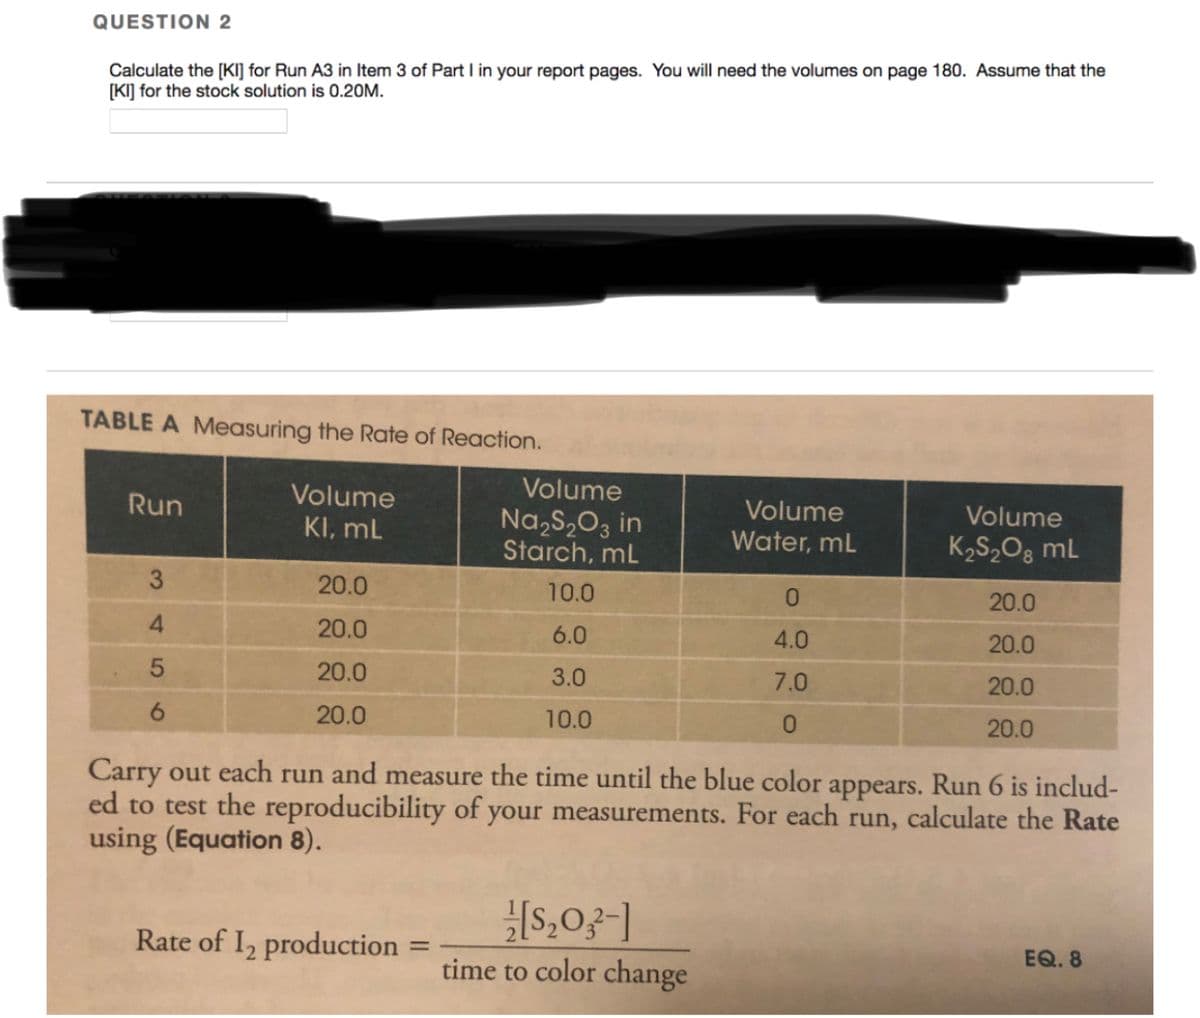 QUESTION 2
Calculate the [KI] for Run A3 in Item 3 of Part I in your report pages. You will need the volumes on page 180. Assume that the
[KI] for the stock solution is 0.20M.
TABLE A Measuring the Rate of Reaction.
Volume
Run
Volume
Volume
Volume
KI, mL
Na,S,O3 in
Starch, mL
Water, mL
K2S,Og mL
3.
20.0
10.0
0.
20.0
20.0
6.0
4.0
20.0
20.0
3.0
7.0
20.0
6.
20.0
10.0
20.0
Carry out each run and measure the time until the blue color appears. Run 6 is includ-
ed to test the reproducibility of your measurements. For each run, calculate the Rate
using (Equation 8).
Rate of I, production
EQ. 8
%3D
time to color change
4
1
